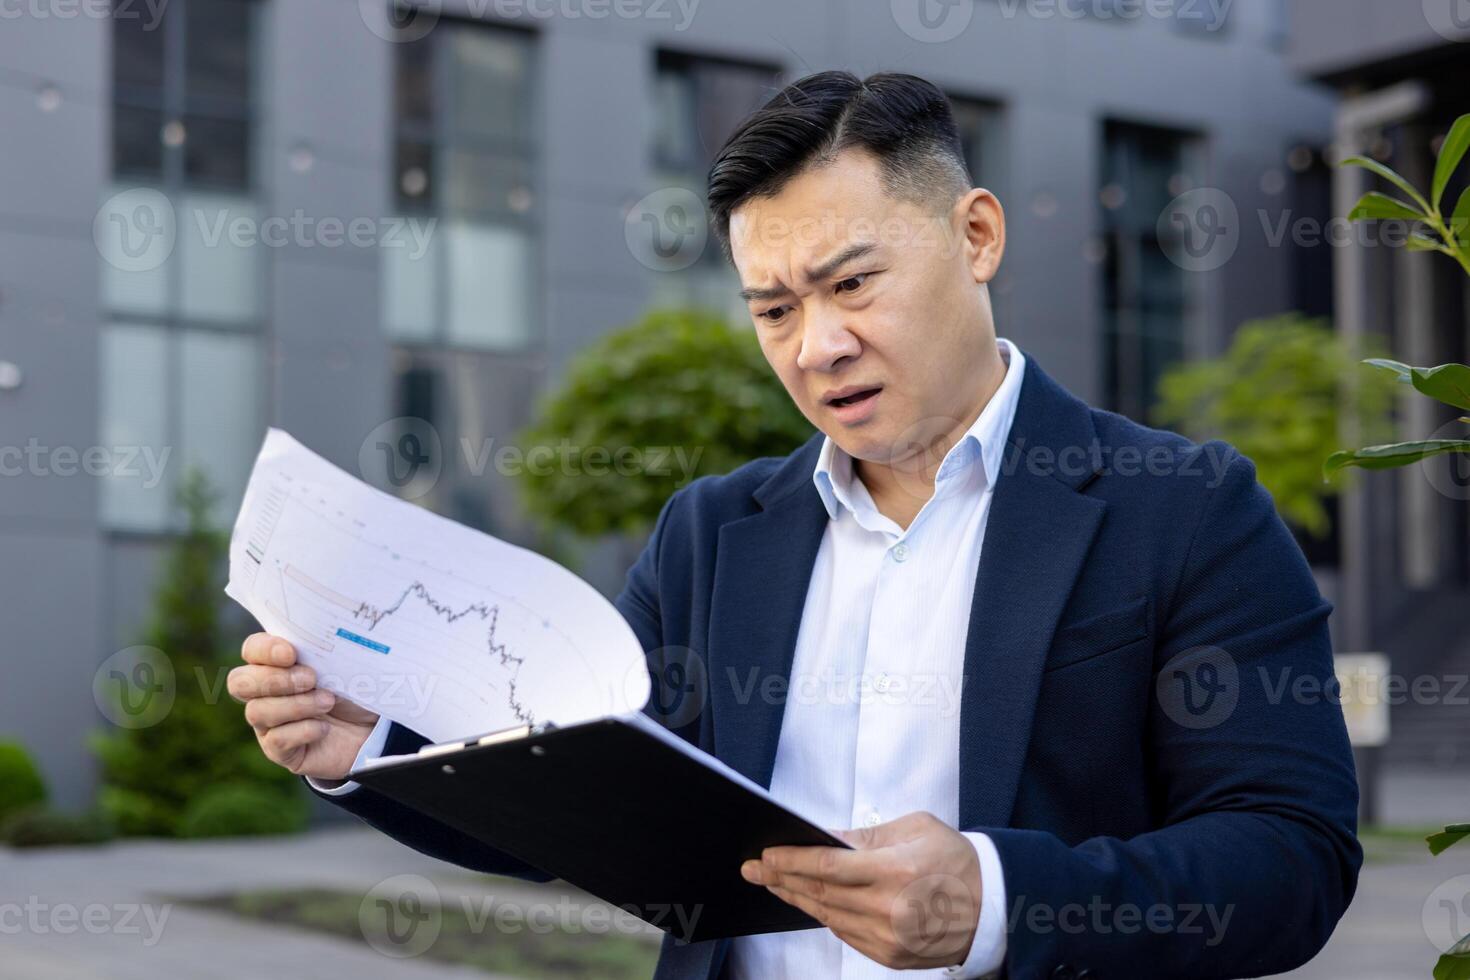 Worried and serious young Asian businessman standing outside office center in suit, holding documents and looking at graphs in frustration. photo